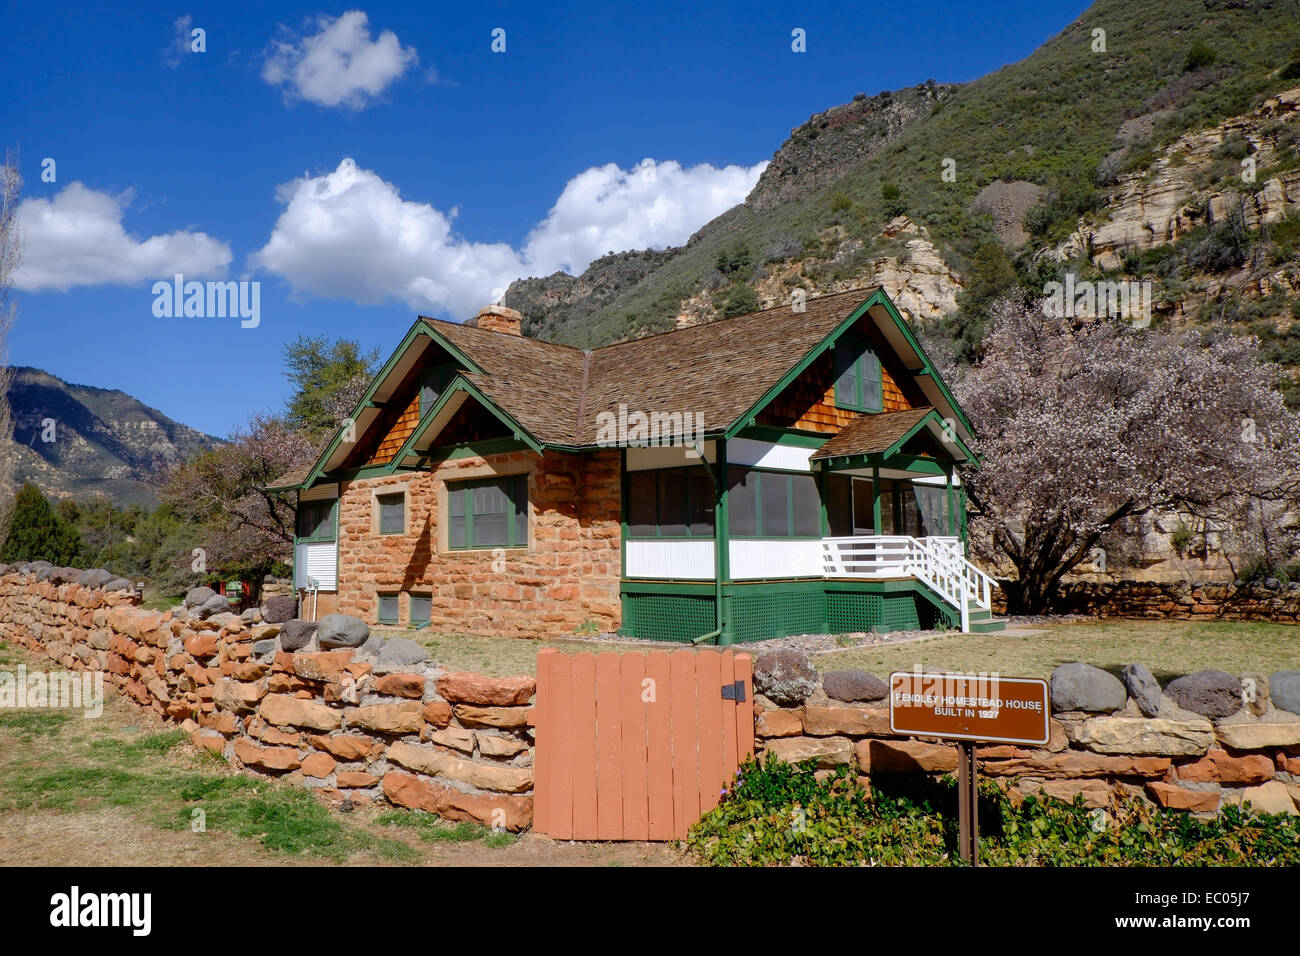 The original farmstead at the old Pendley orchard and farm, at Slide Rock State Park in Oak Creek Canyon, Arizona, USA. Stock Photo